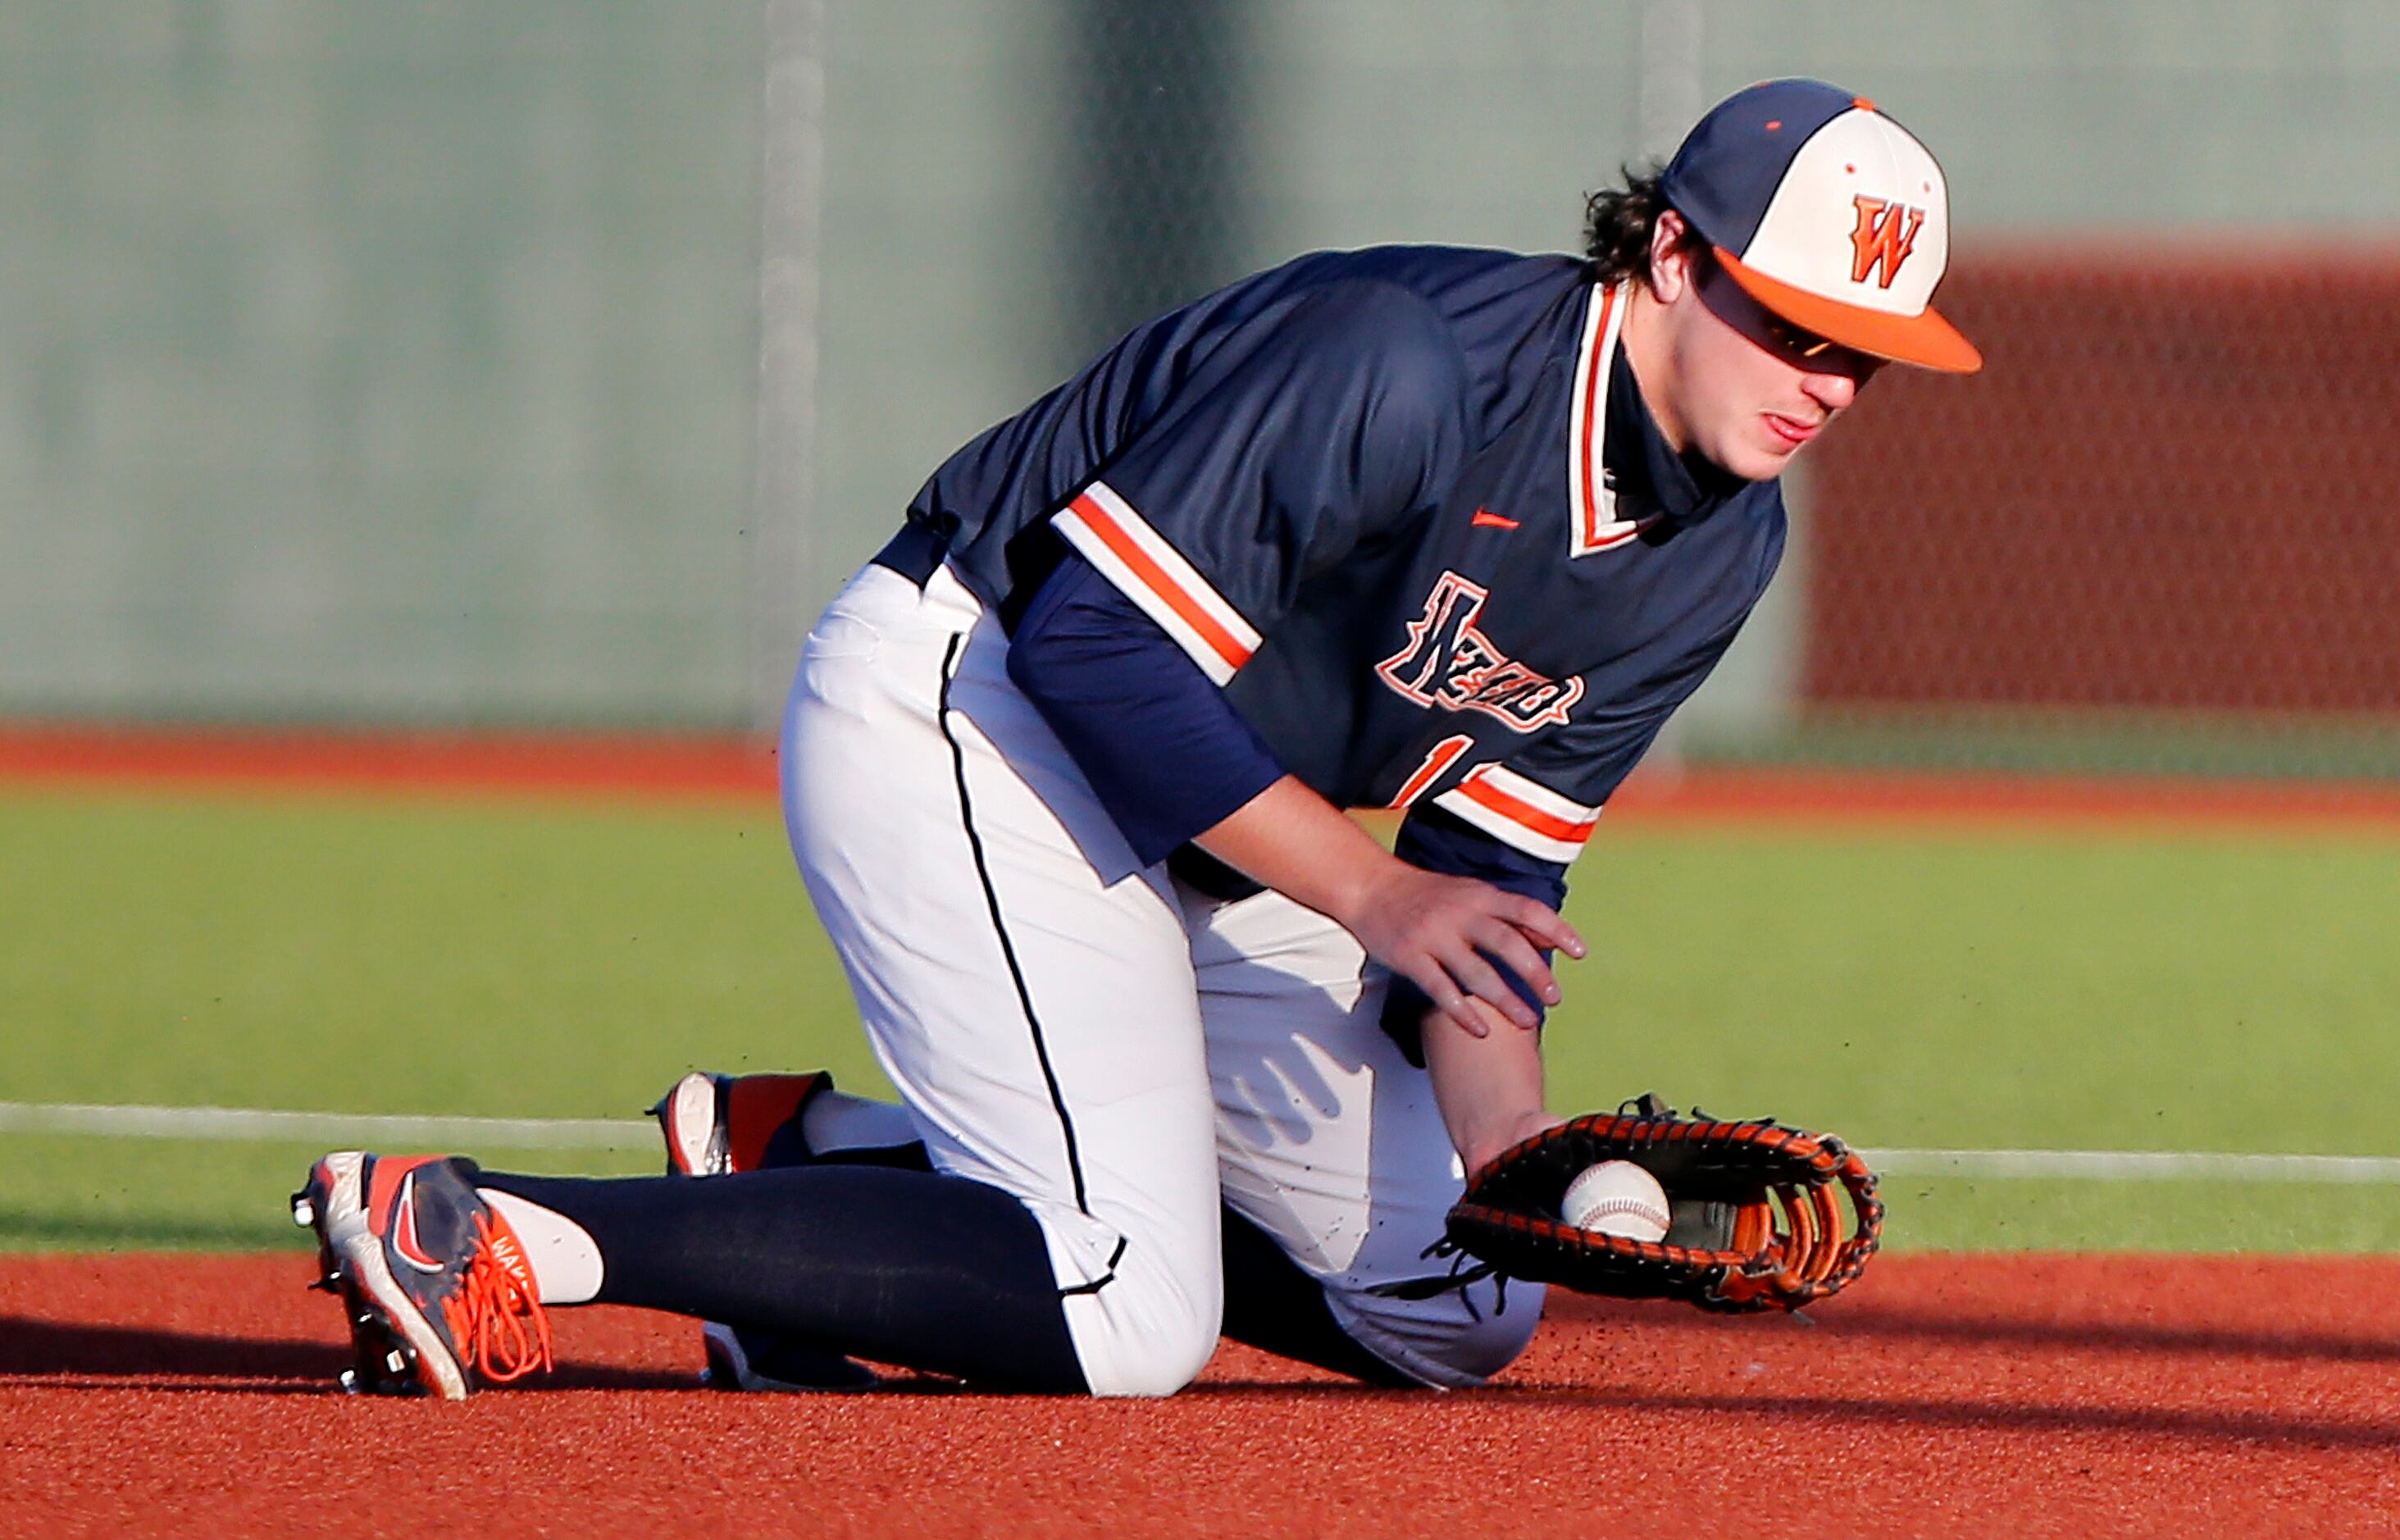 Wakeland High School first baseman Preston Snead (11) stops the ball in the infield and...